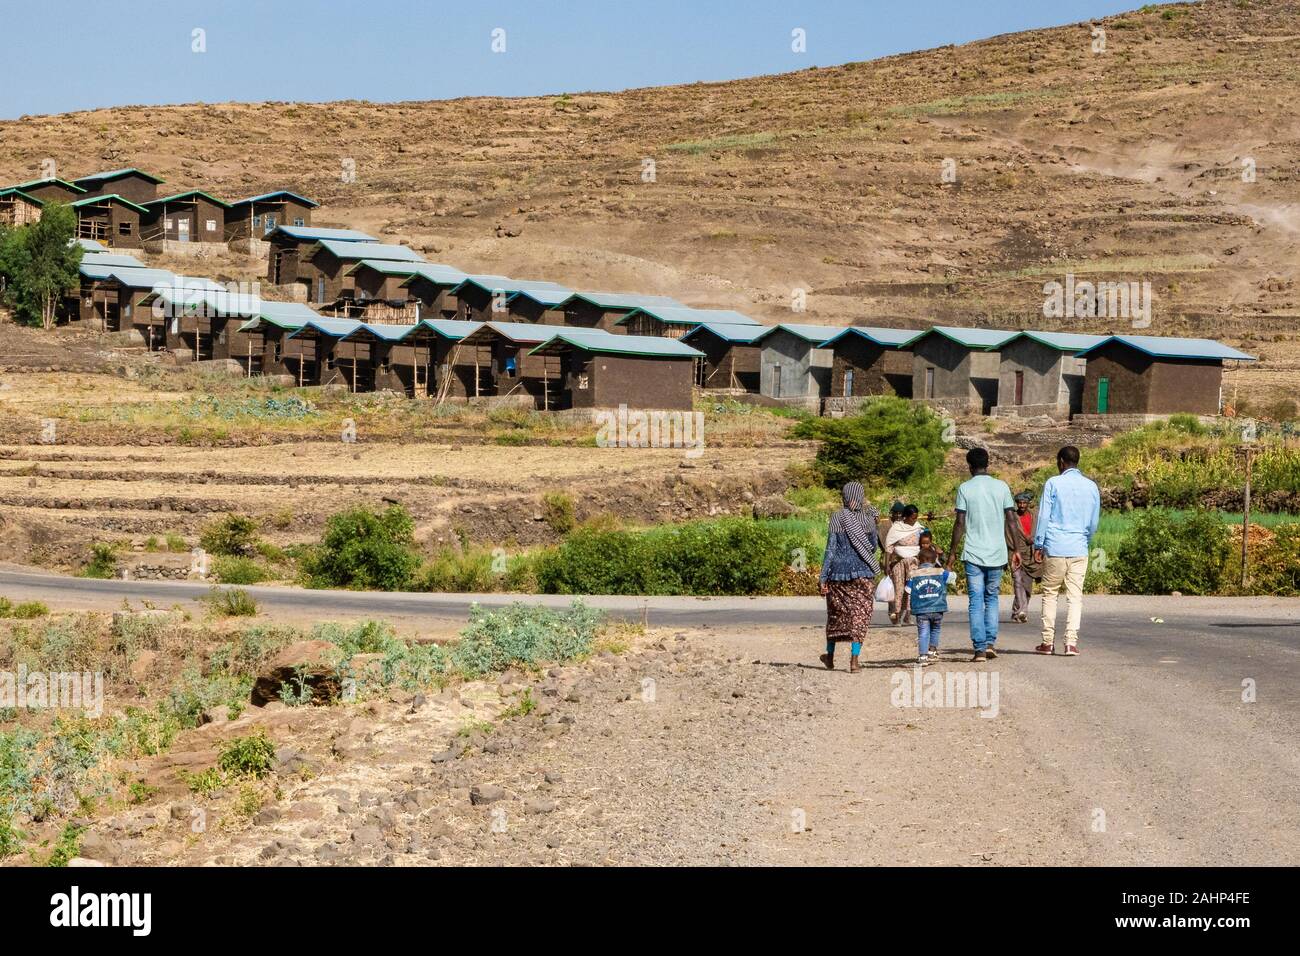 ETHIOPIA, KULMERSK,Family walking towards the new housing complex, built in traditional style with wood and mud walls but covered with mud Stock Photo